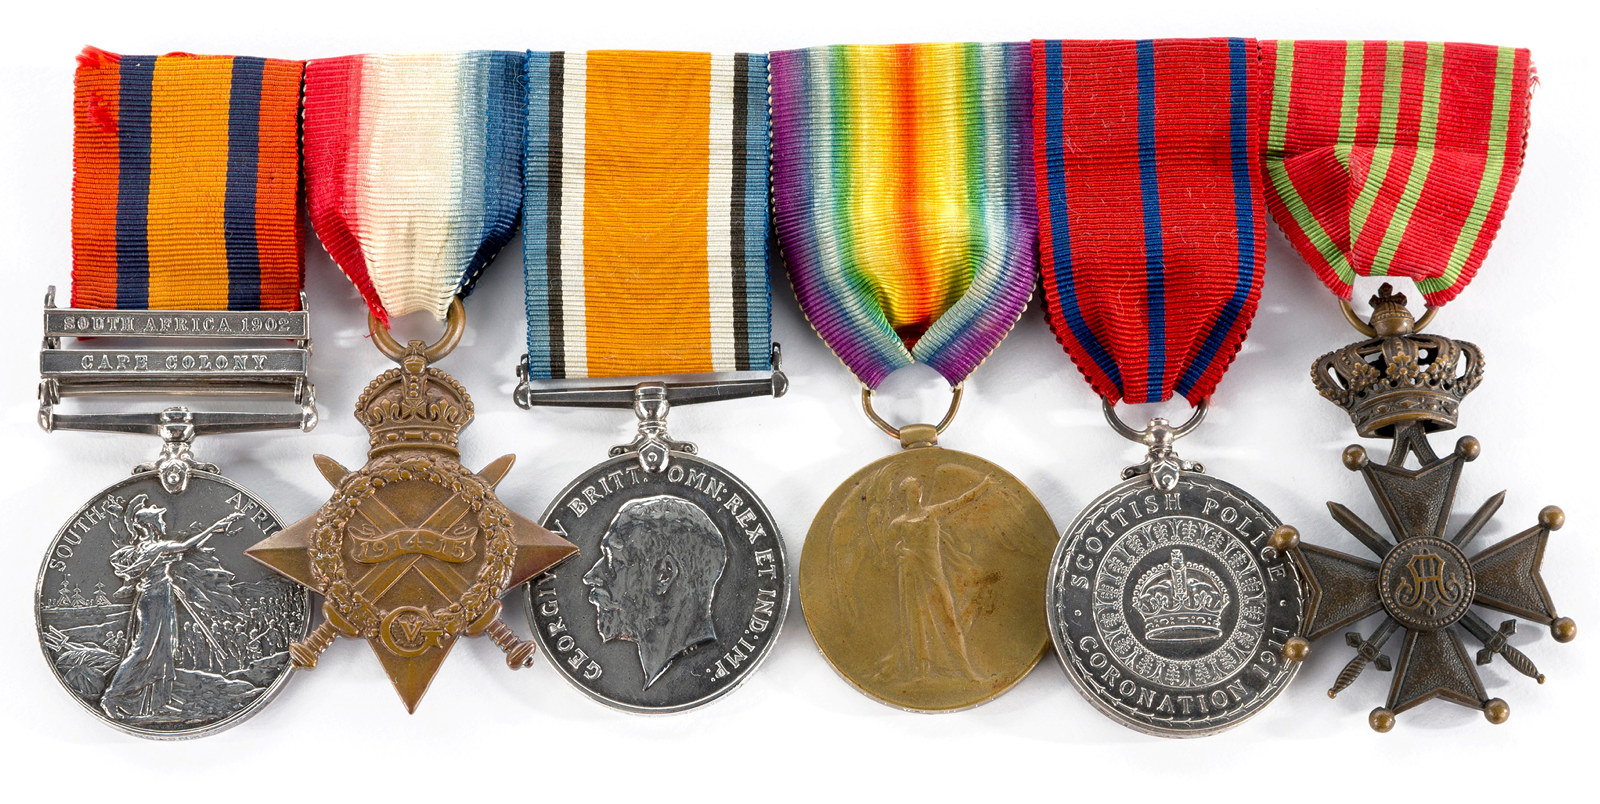 War service medals and Scottish Police Medal awarded to Sergeant James Johnstone Walsh, 1902-1919    